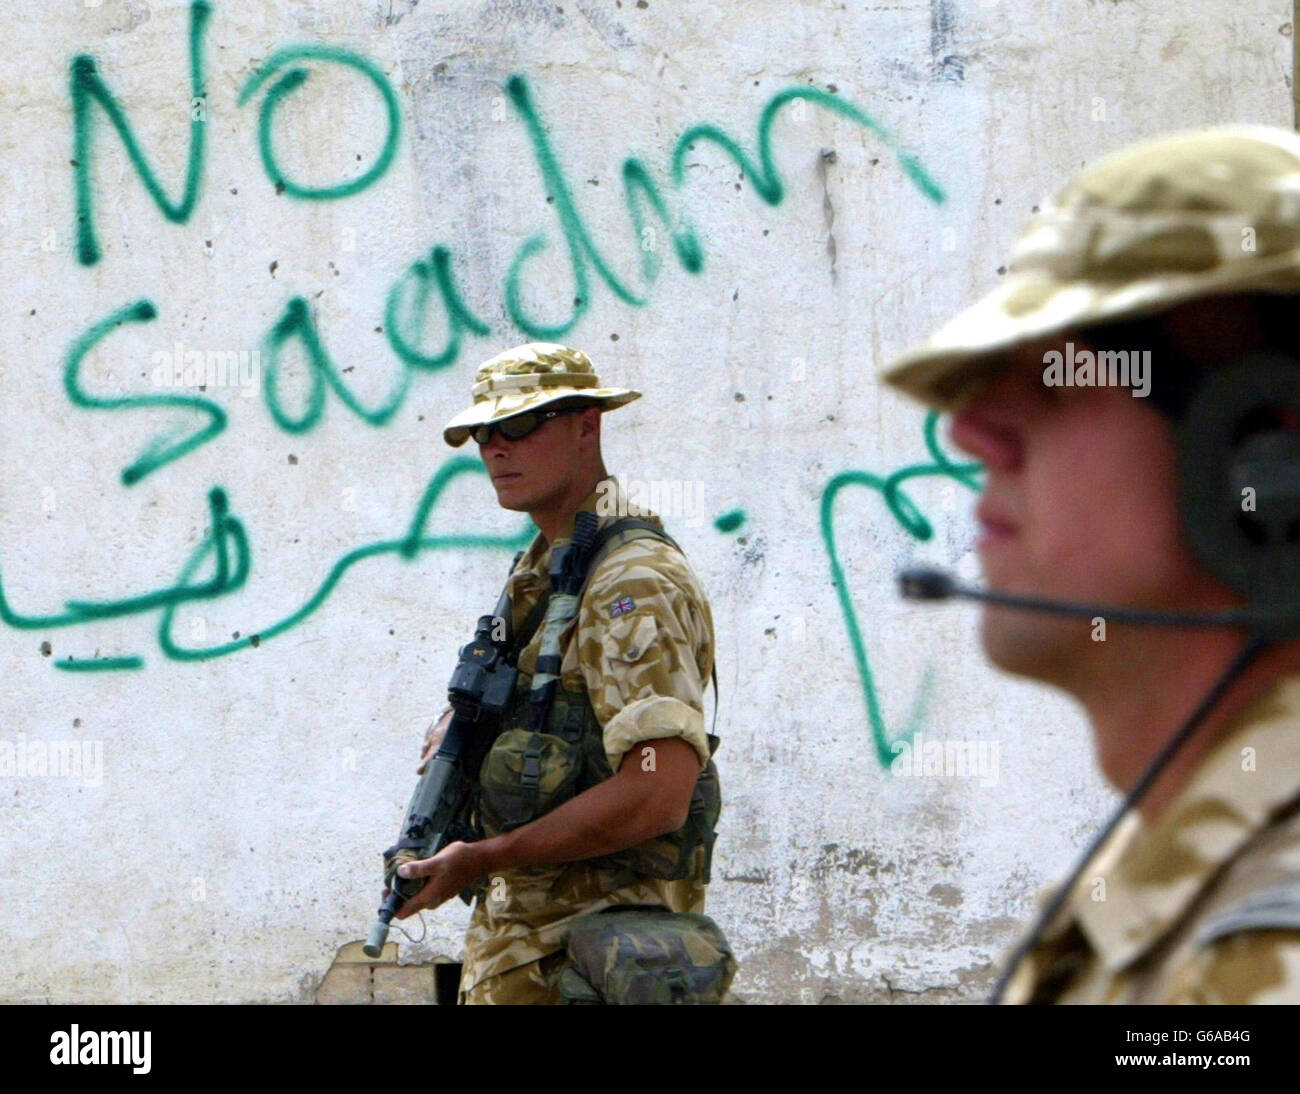 Soldiers from 51 Squadron from the British Royal Air Force Regiment patrols past graffiti that says 'No Saddam' in the southern Iraqi town of Safwan. The British forces are helping the local people with humanitarian aid. Stock Photo